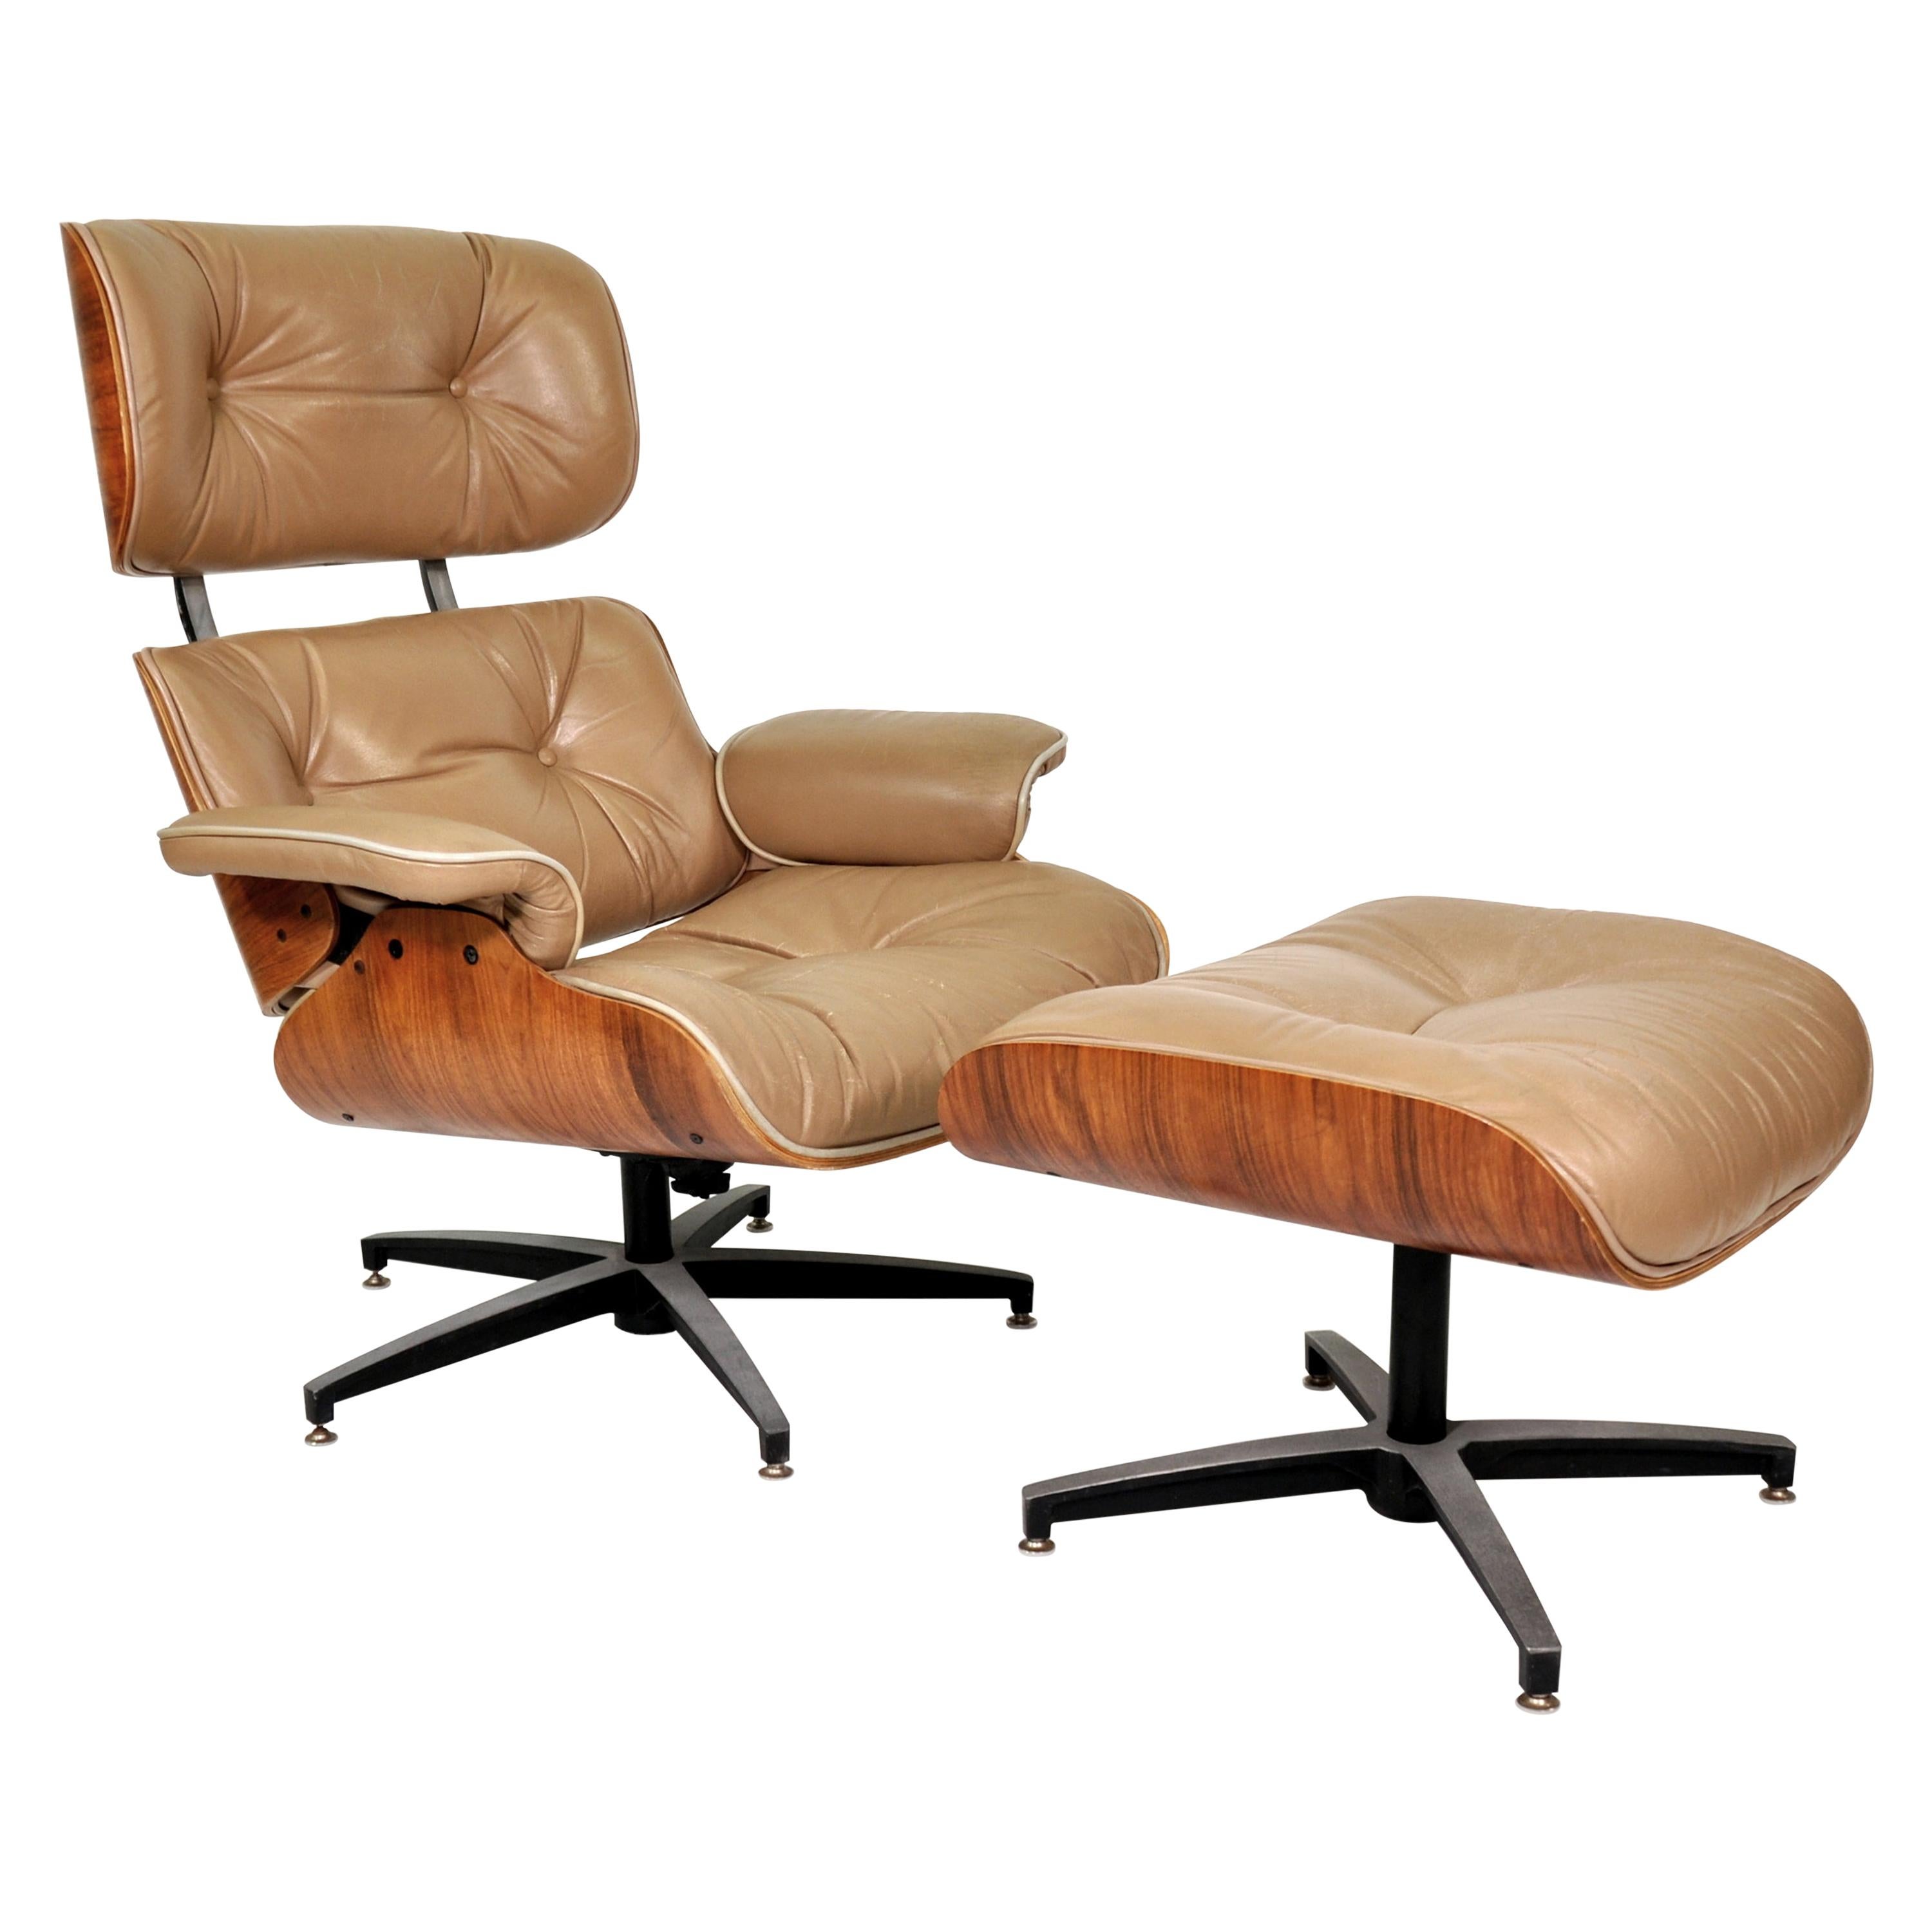 Midcentury Eames Style Leather Lounge Chair and Ottoman